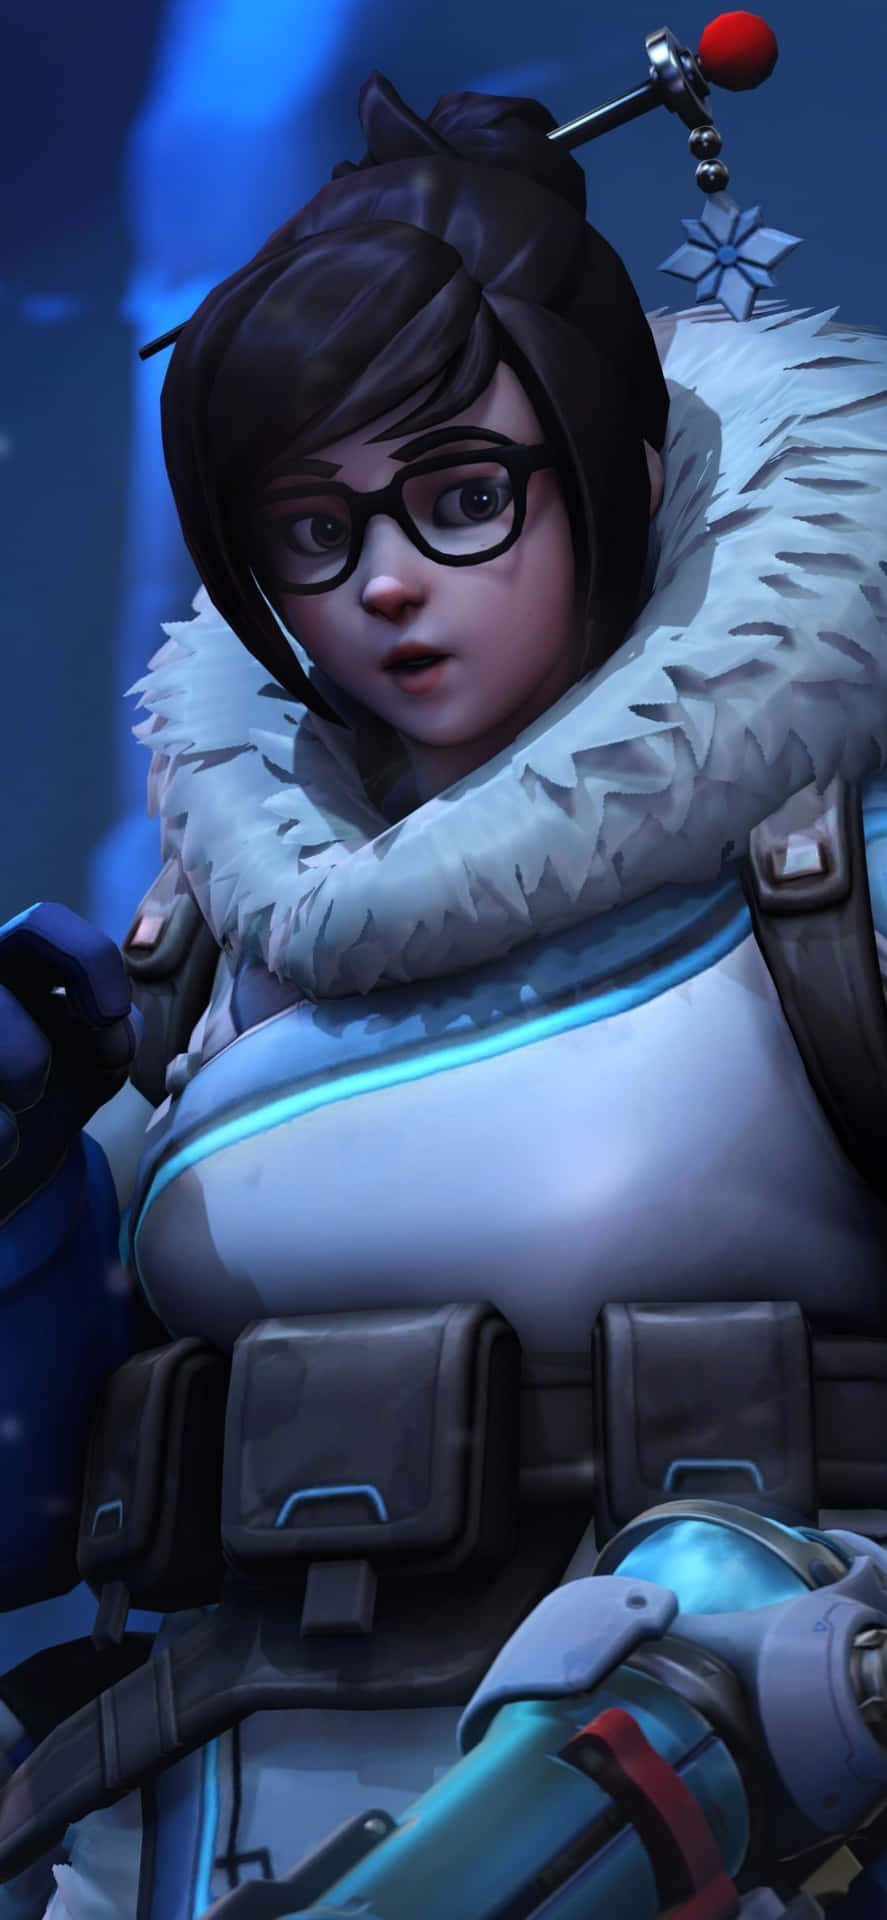 Chilling with Overwatch's Mei Wallpaper